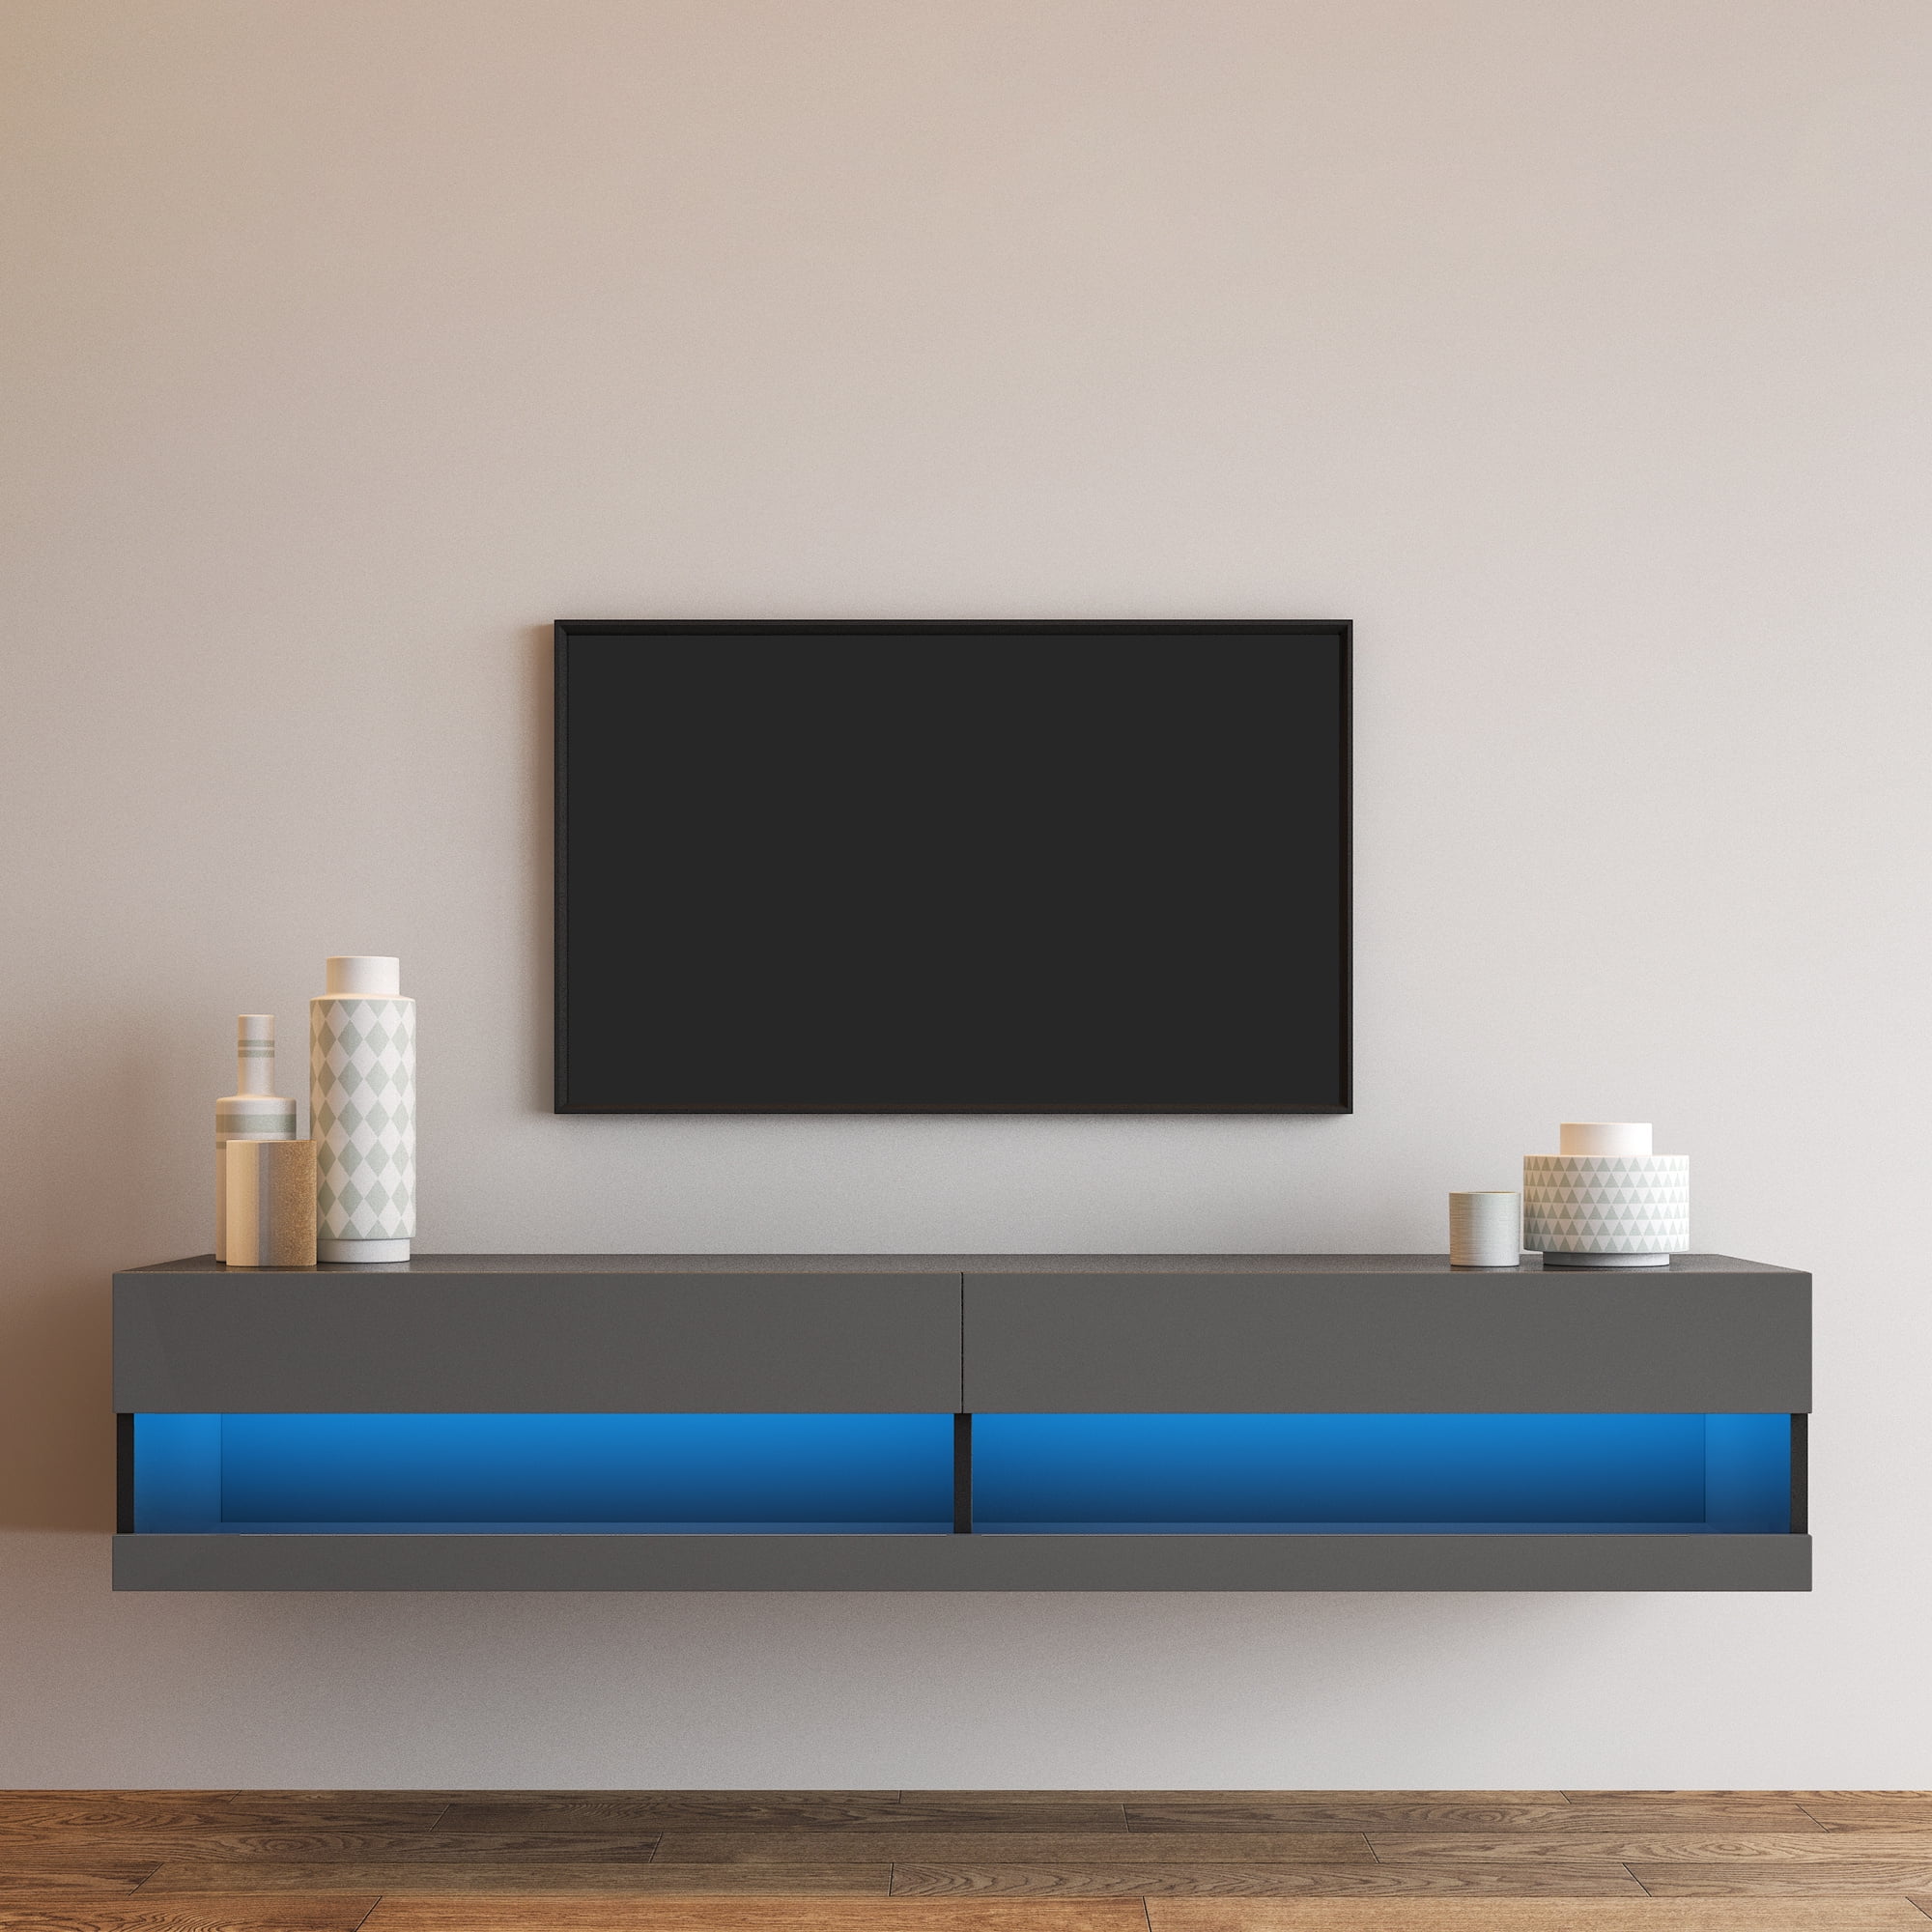 Details about   WALL MOUNTED TV STAND 20-Color LEDS Floating Shelf Black For TVs up to 80 INCH 